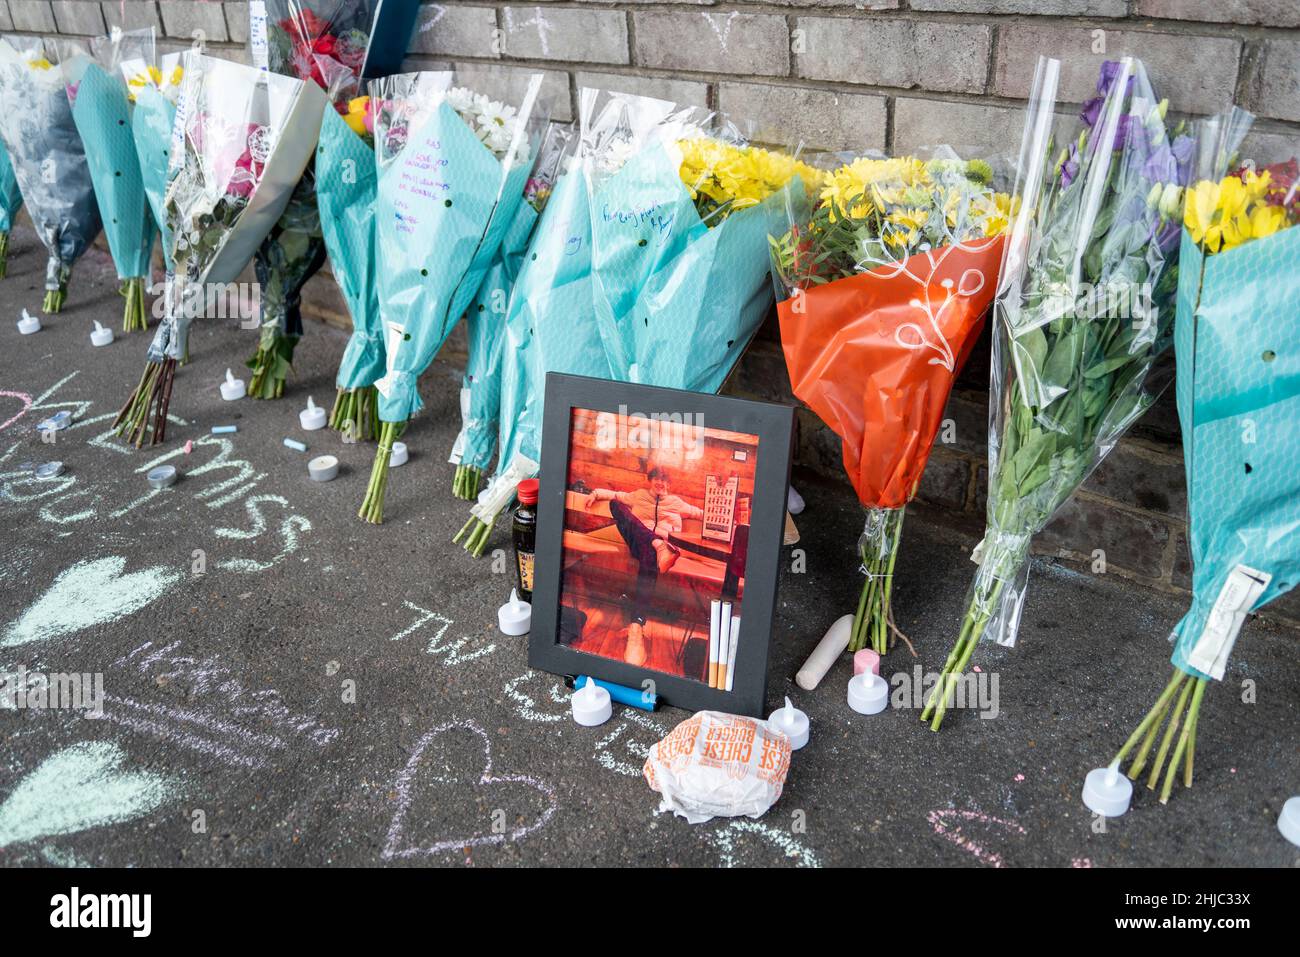 Southend on Sea, Essex, UK. 28th Jan, 2022. Tributes have been left at the scene of the death of an 18 year old who has been named as Kacper Ksiazek, a male who fell from a multi-storey car park in the Victoria Plaza complex on the evening of Wednesday 26th Jan. Flowers and candles have been left, alongside many personal messages Stock Photo